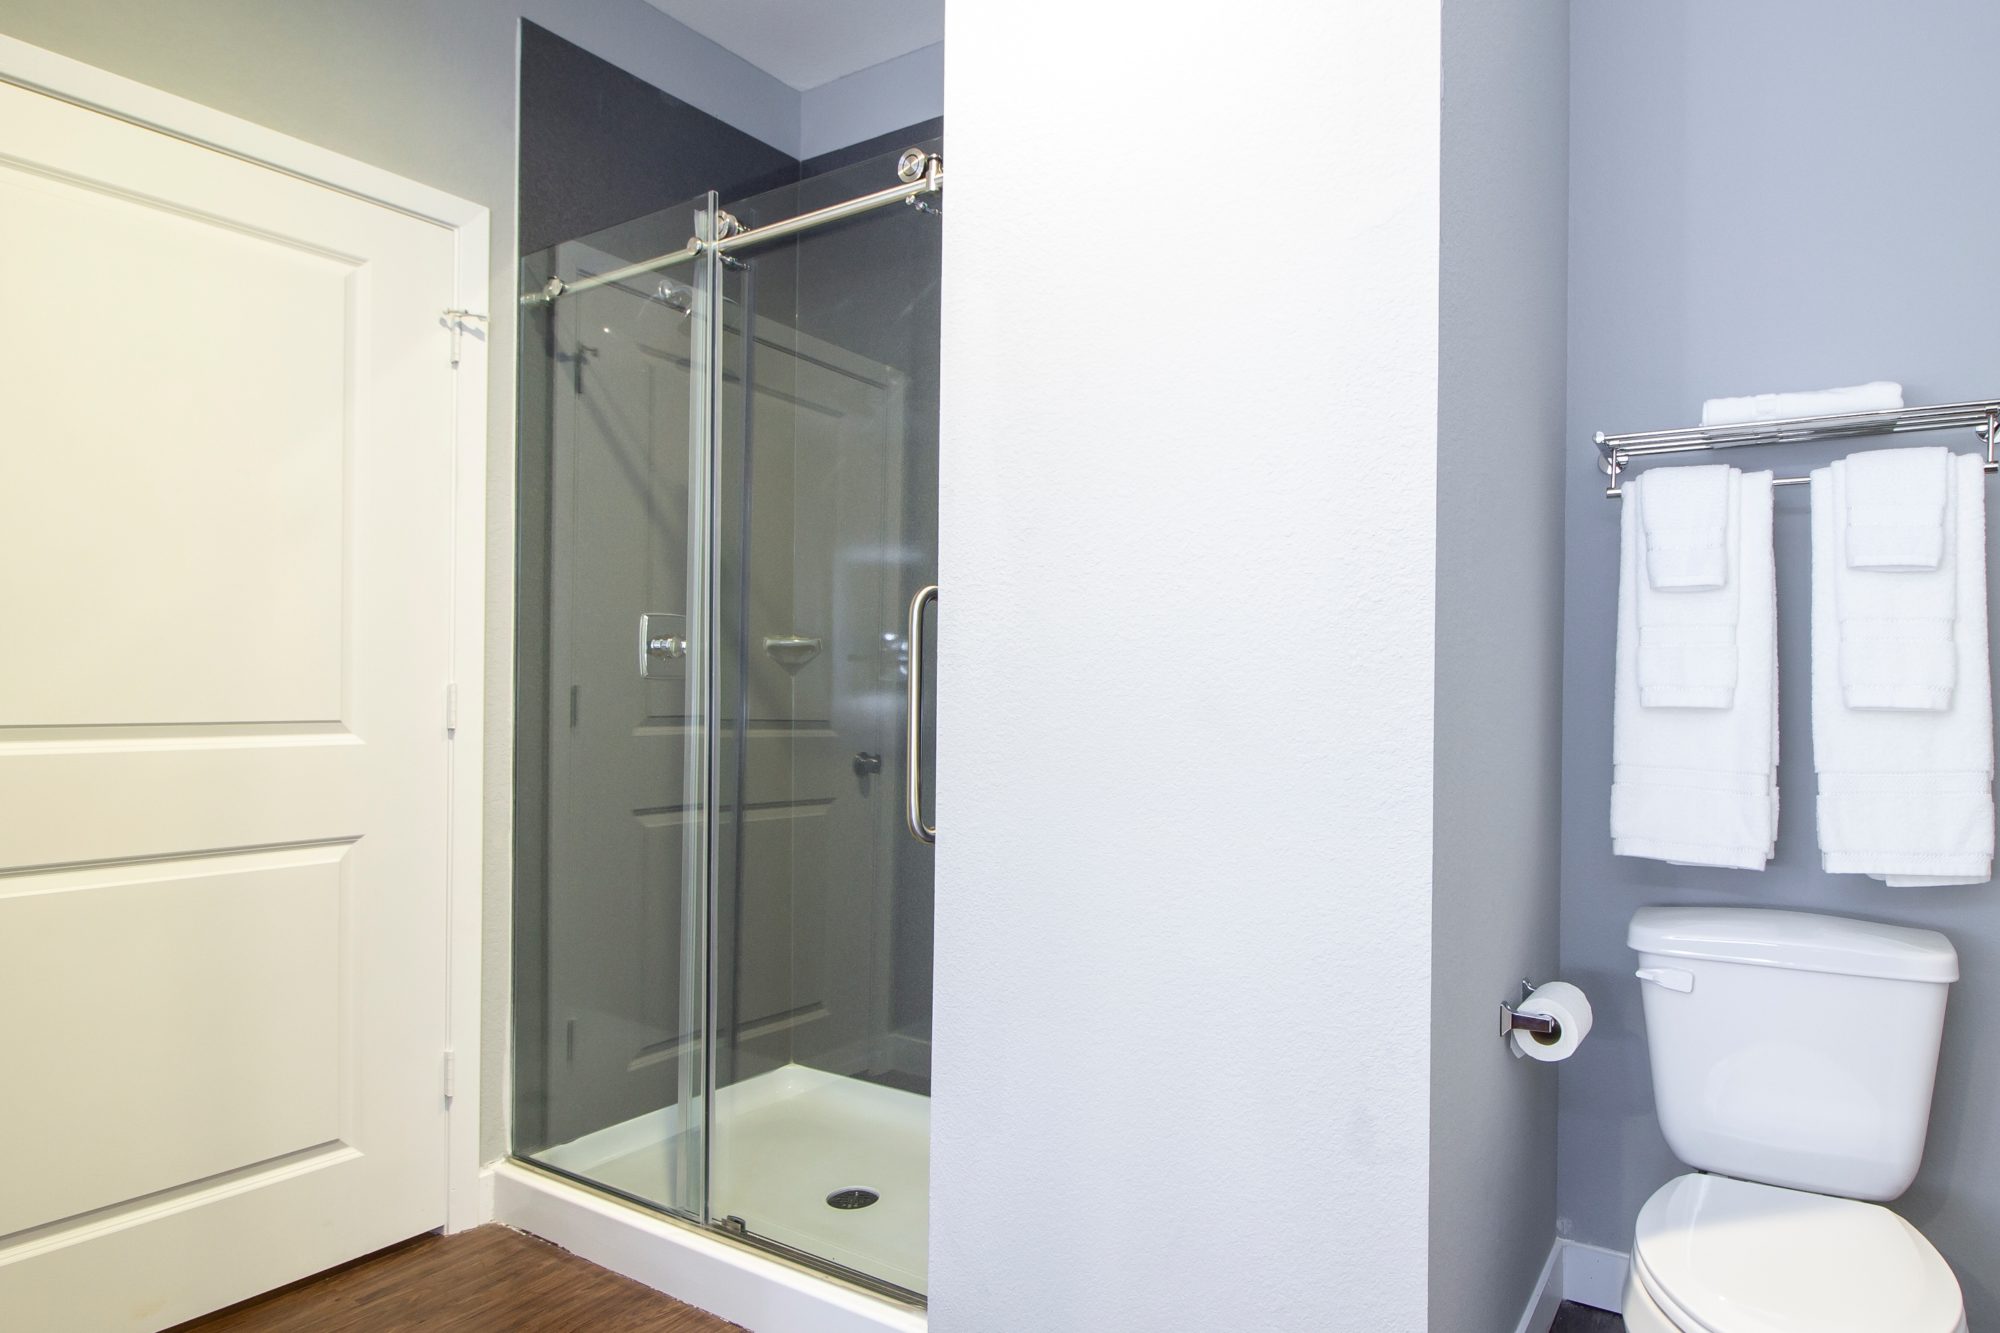 toilet, towel rail and shelf with towels, shower with glass door, laminate flooring